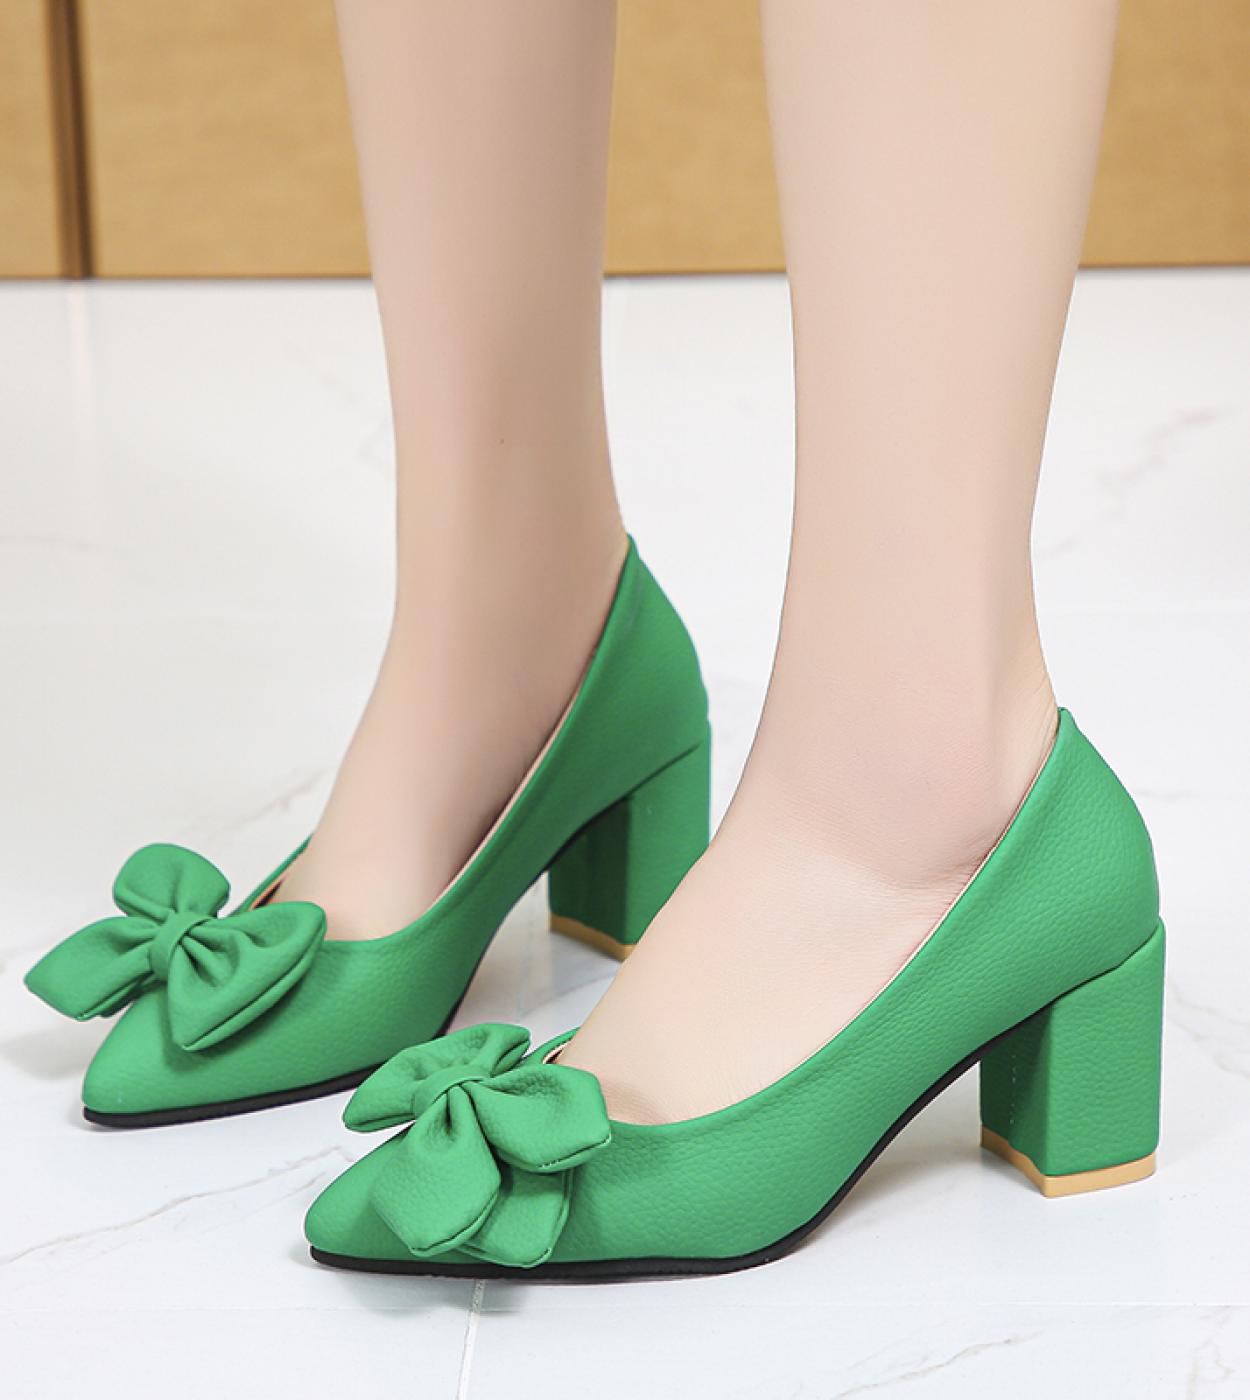 2022 New Thick With Pointed Butterflyknot High Heels Sweet Small Fresh Single Shoes Black Party Work Womens Shoes Elegan